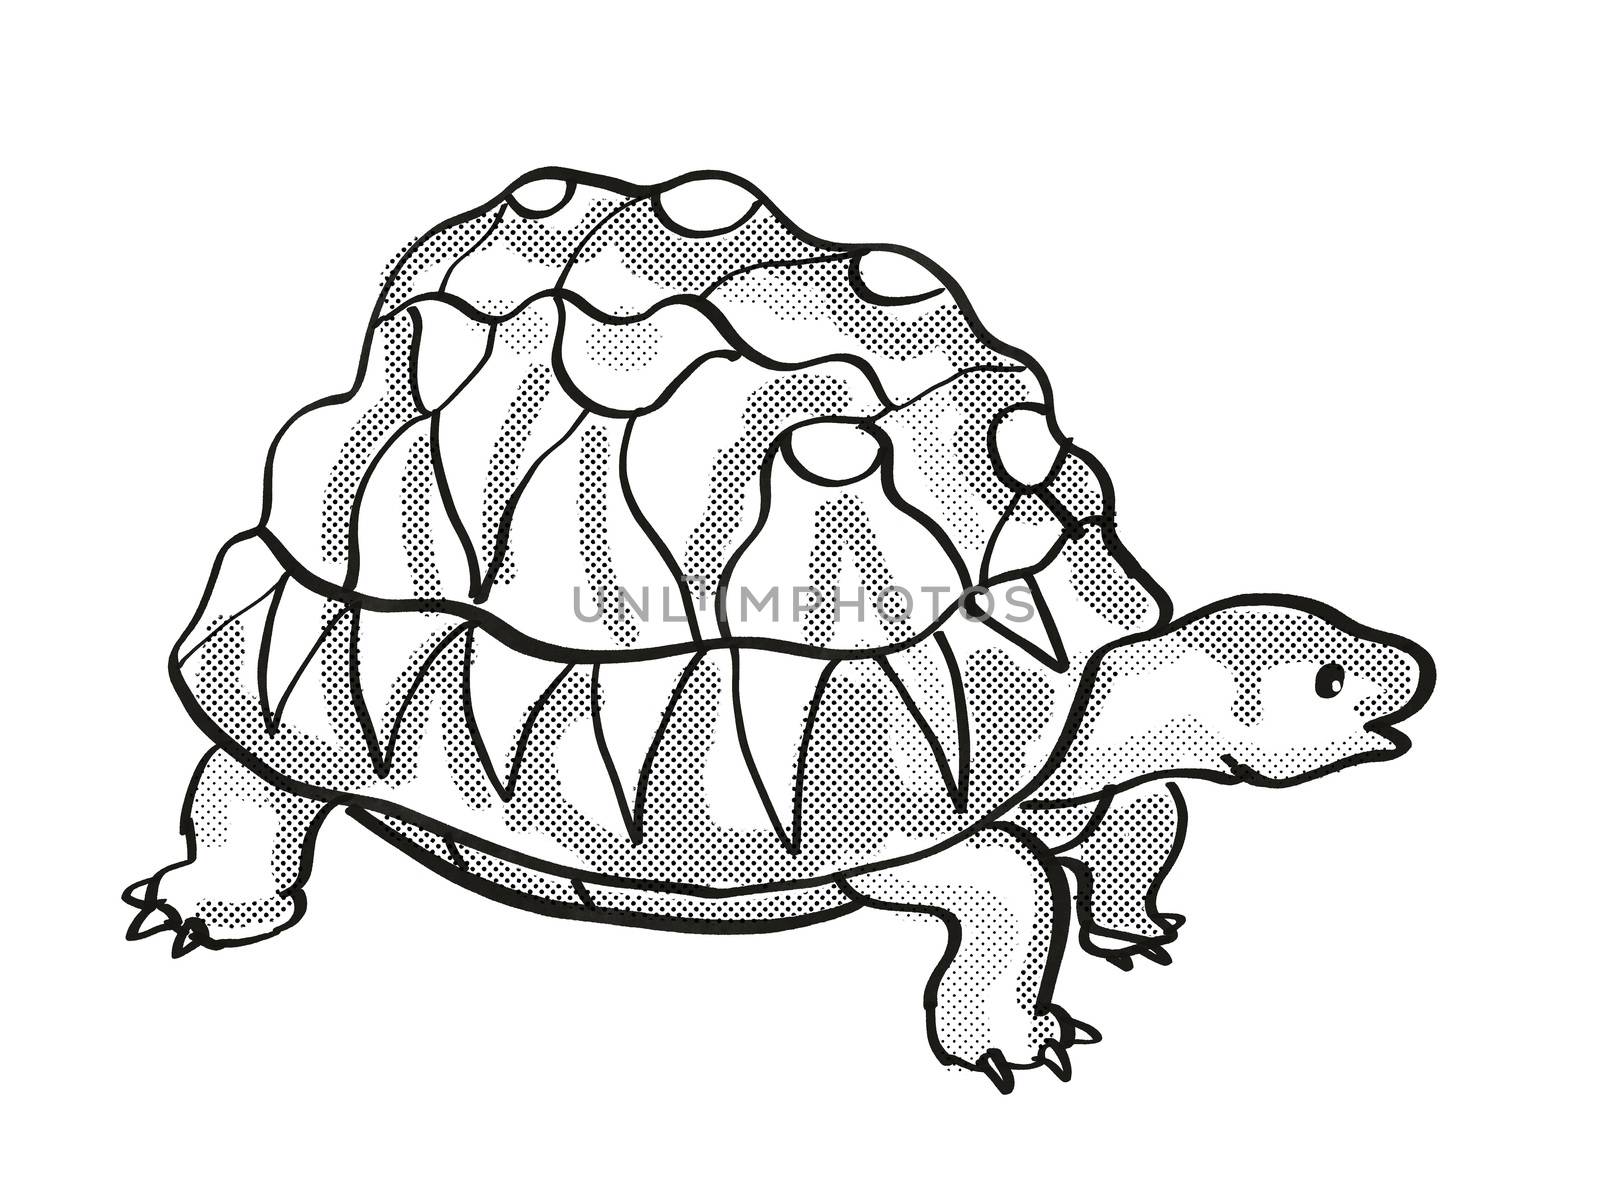 Retro cartoon mono line style drawing of a Radiated Tortoise, an endangered wildlife species on isolated white background done in black and white full body.